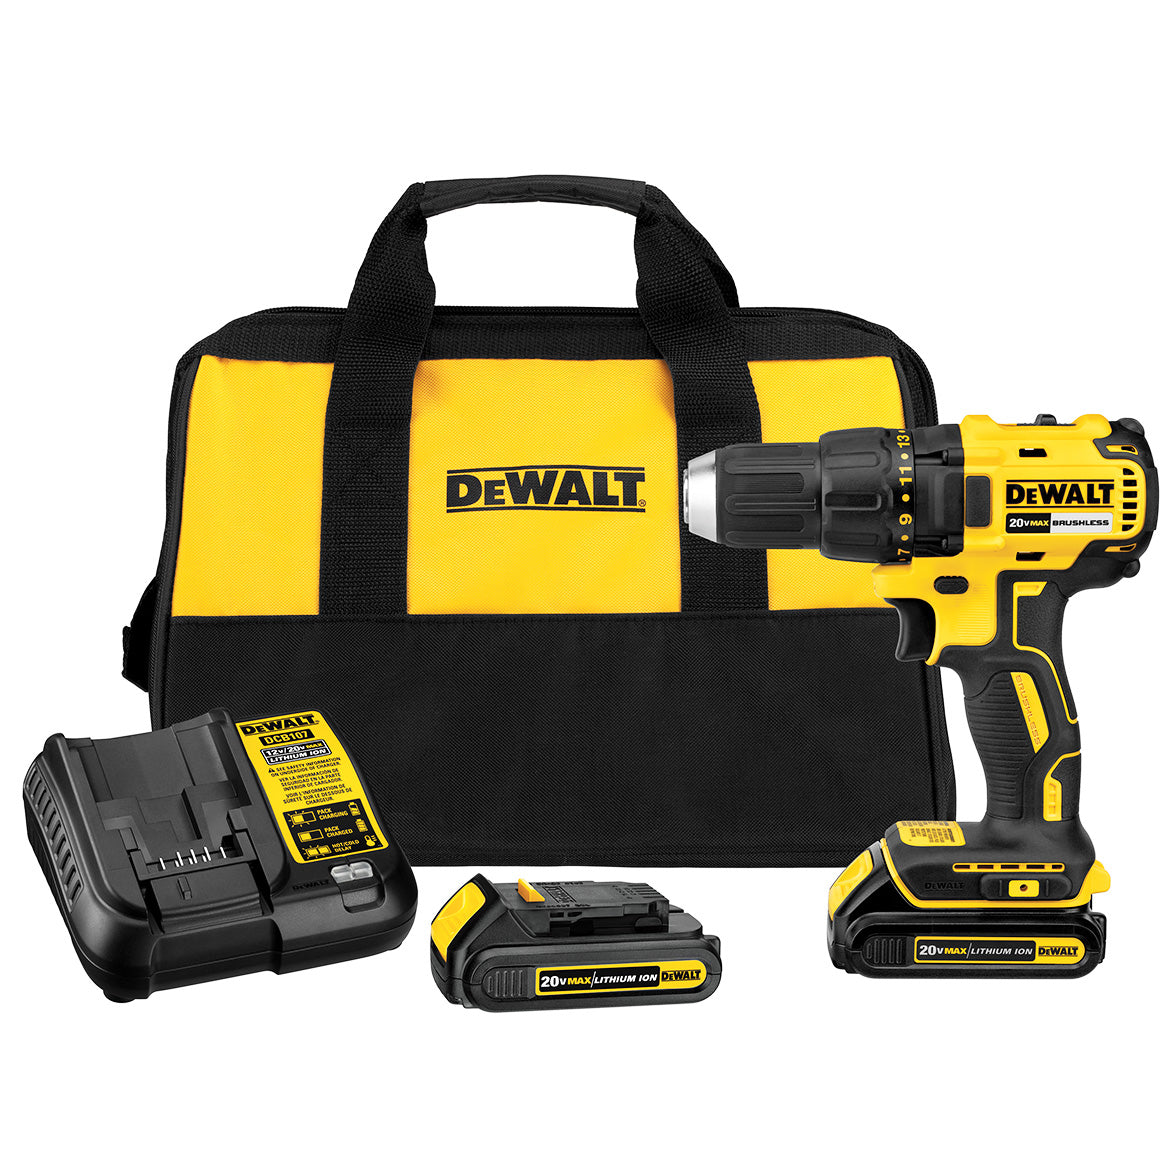 DeWALT DCD777C 20V 1/2-Inch Lithium-Ion Brushless Compact Drill